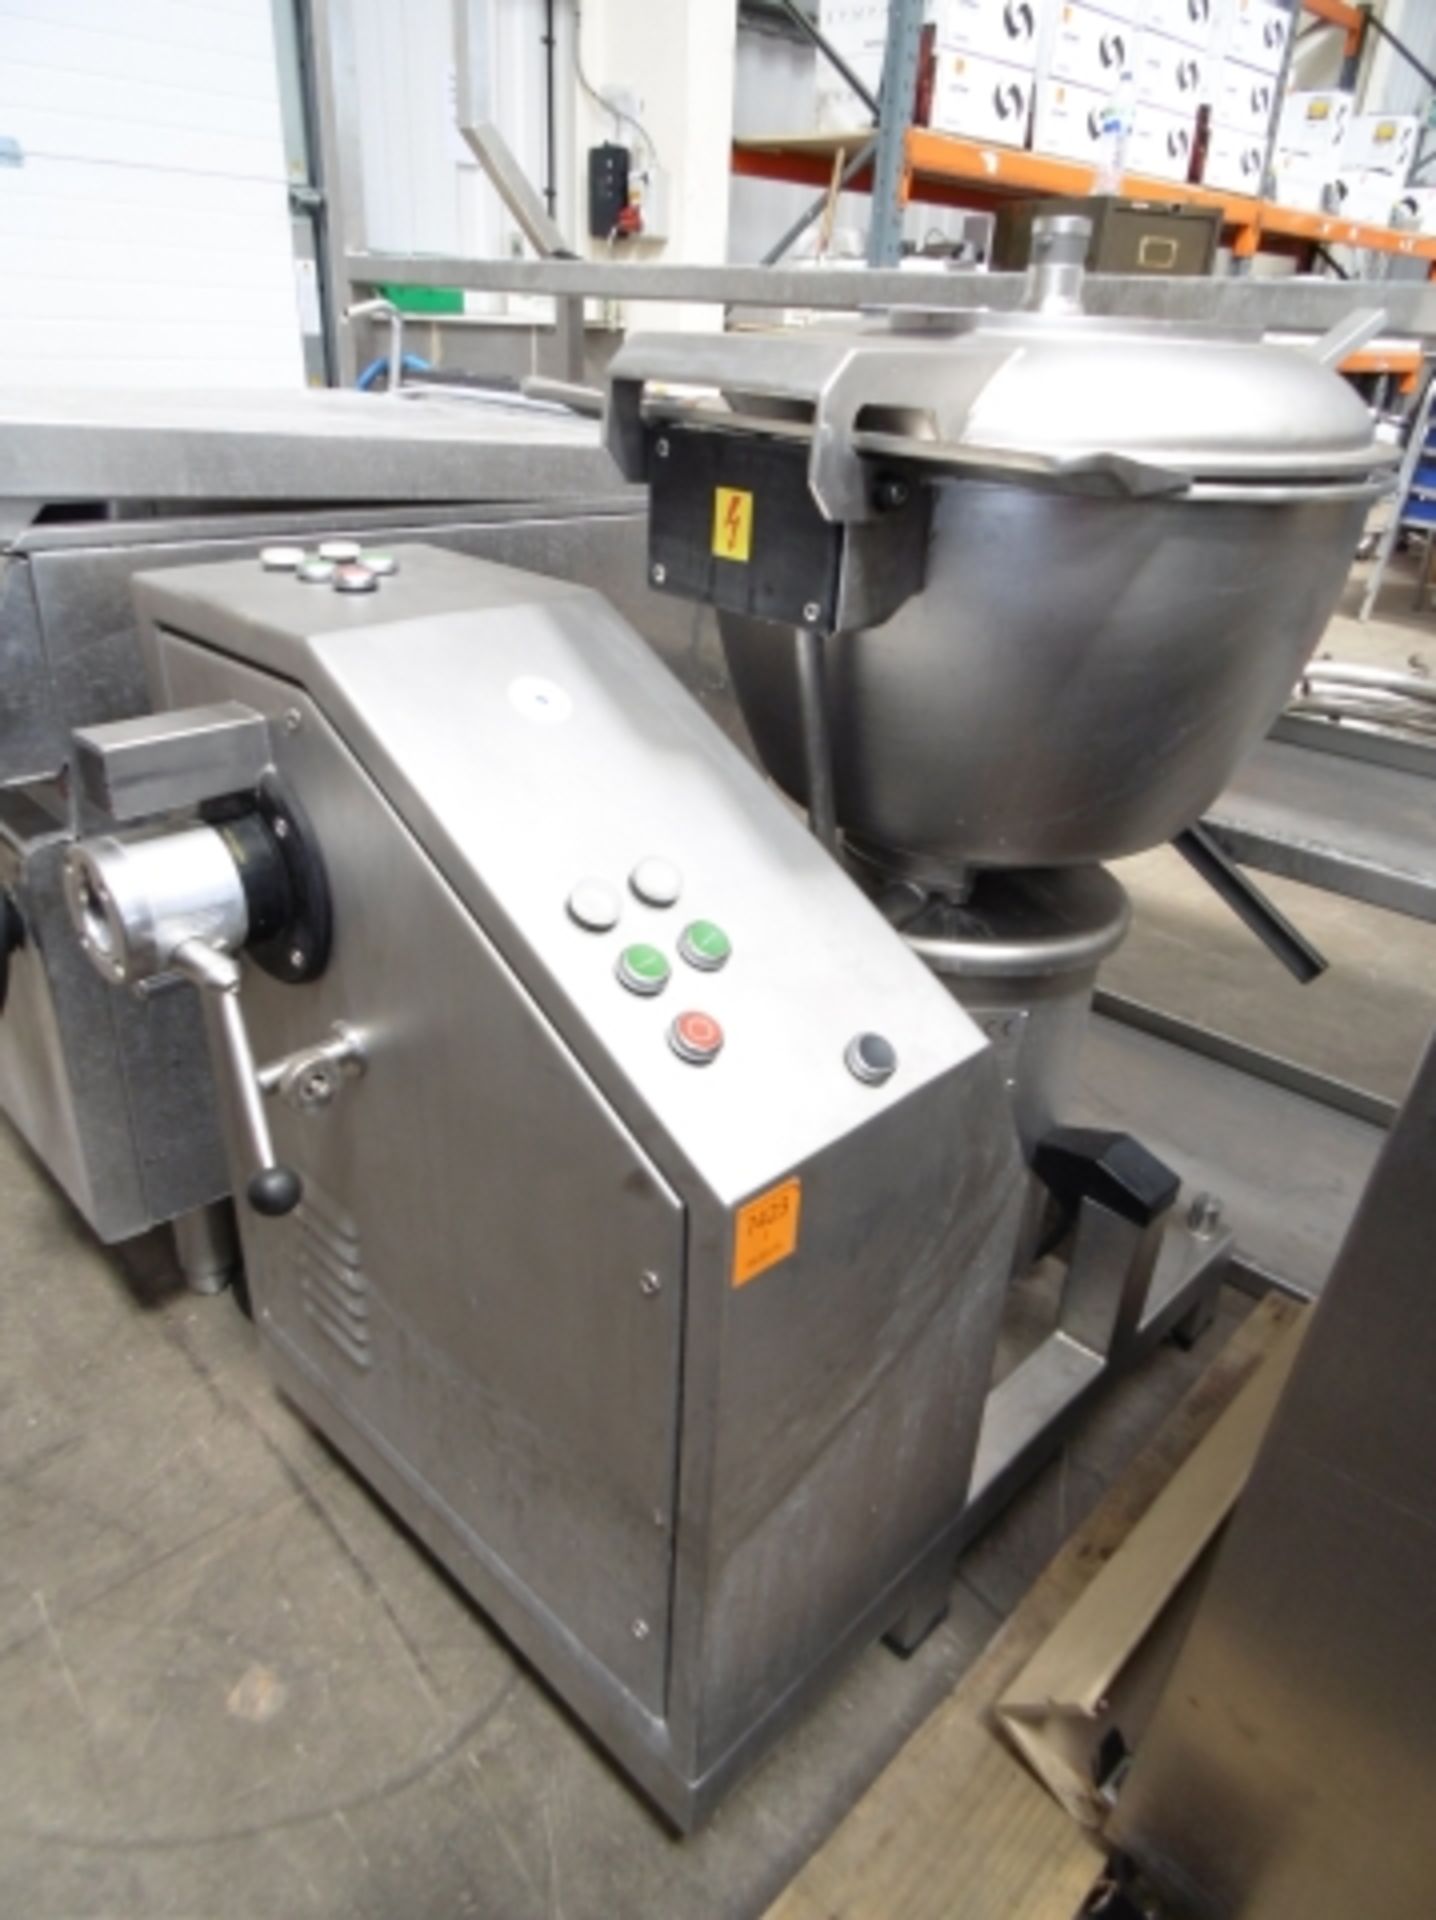 * 1997 Stephan type UM44S Universal Stainless Steel Vertical Cutter Mixer; 3 phase - 400V; serial no